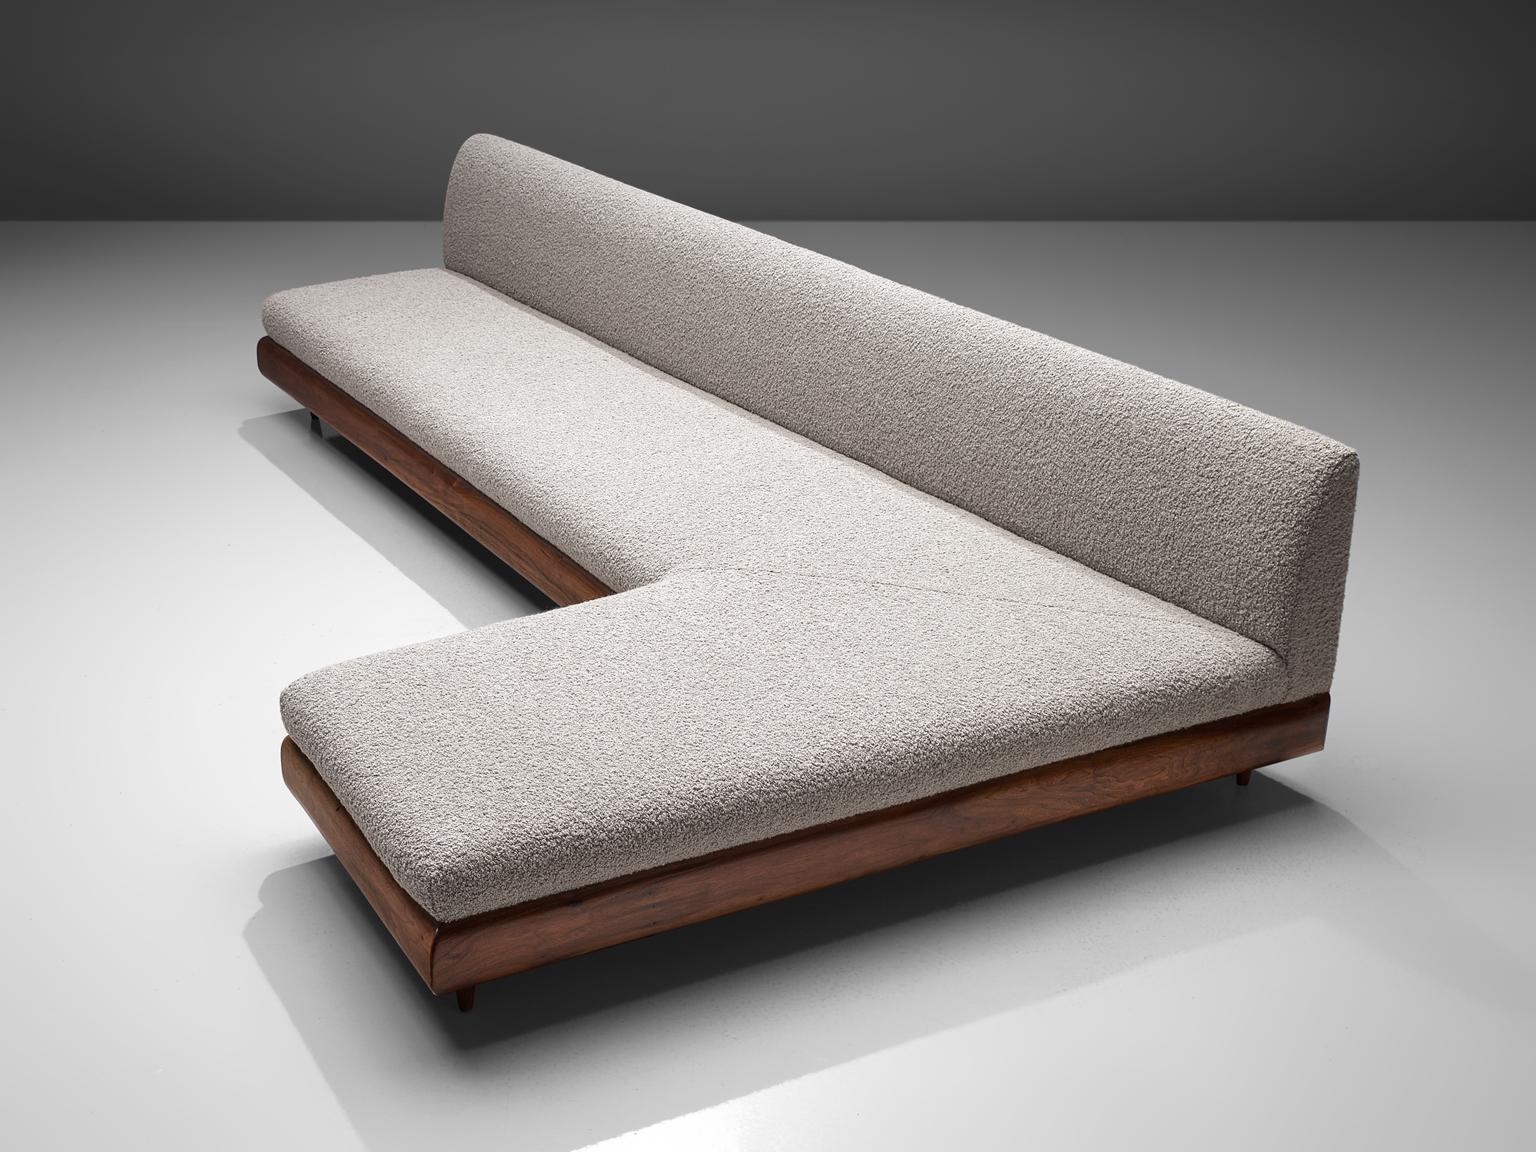 Adrian Pearsall, 'Boomerang' sofa, in Pierre Frey fabric and walnut, United States, 1960s

This boomerang sofa has a unique shape with sinuous lines which create a monumental and inviting look. The right-facing sofa is a great addition to a living